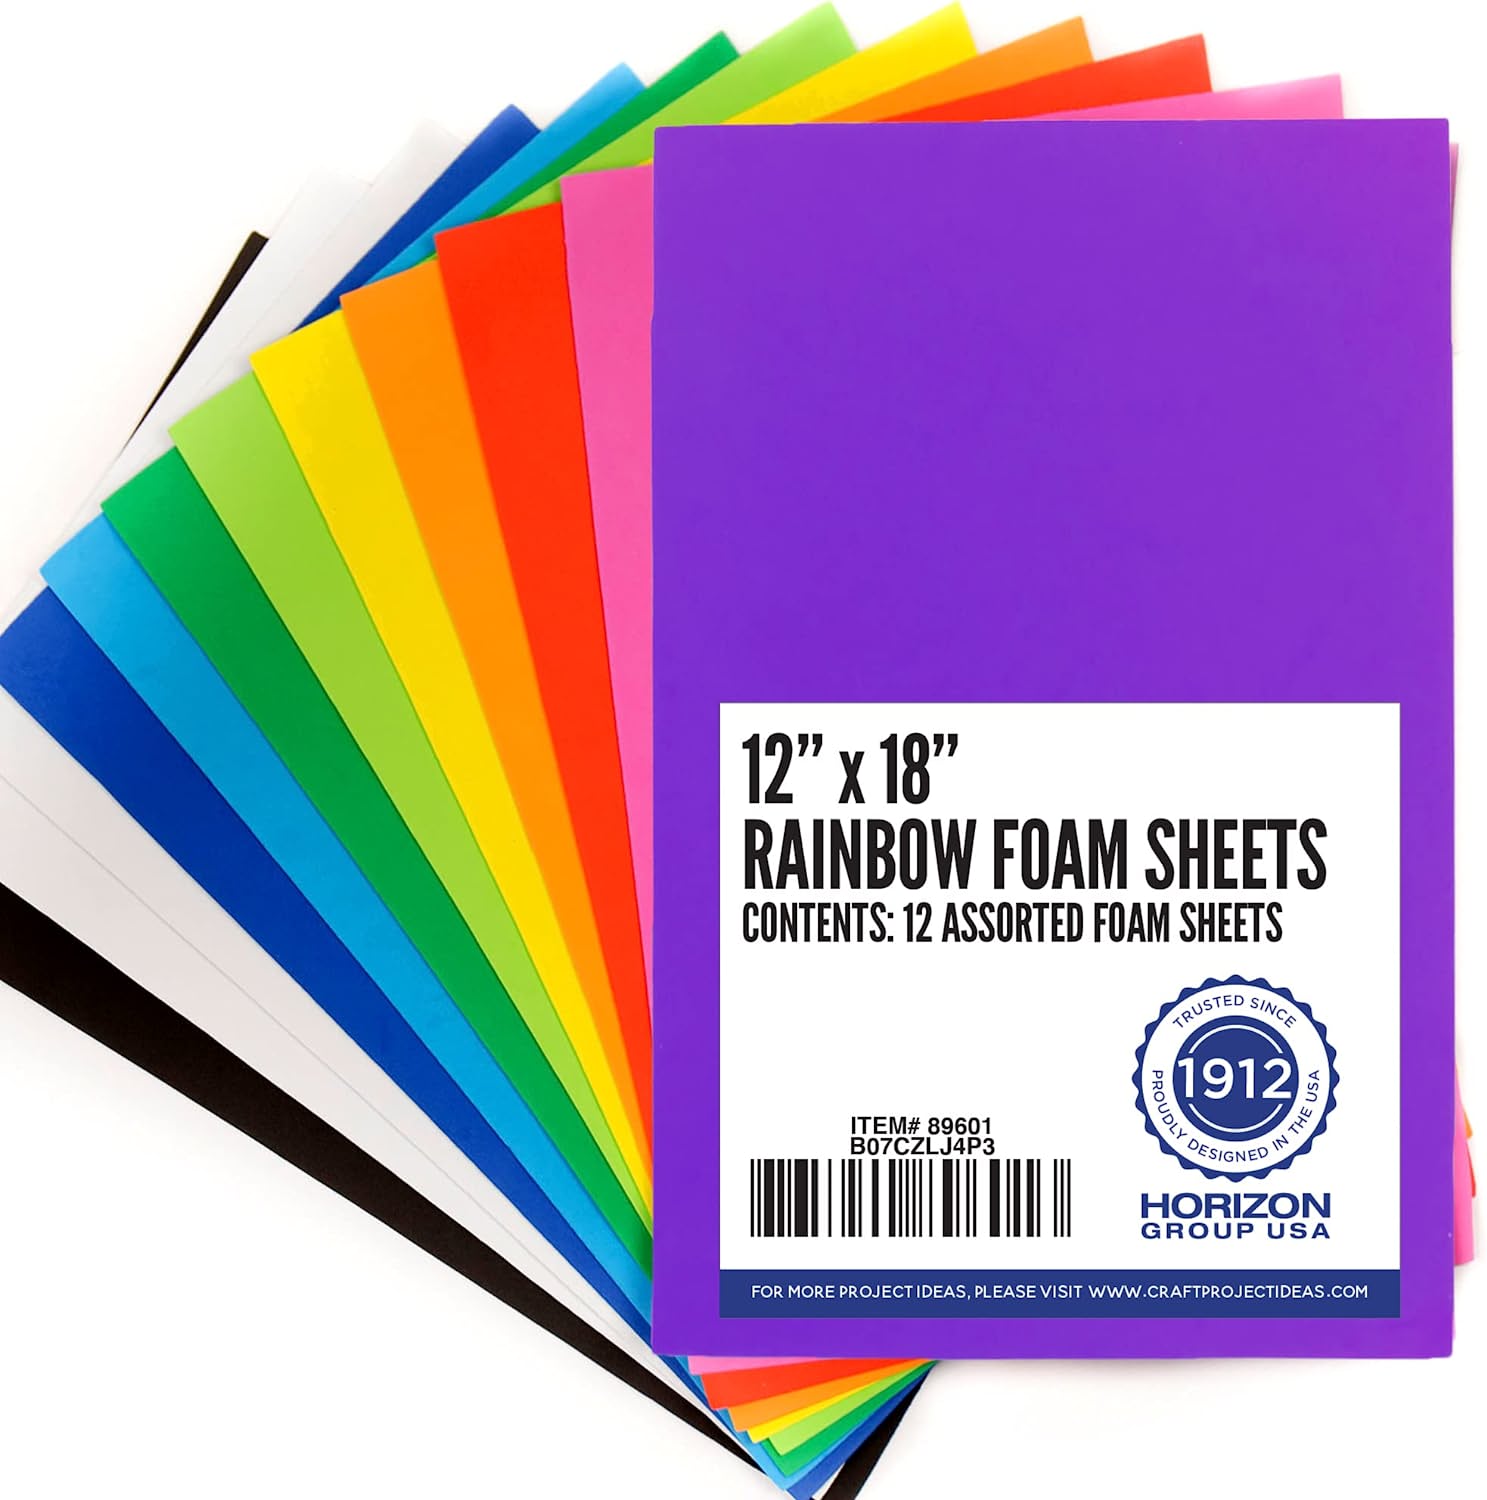 Tosuced 80 Pcs Eva Foam Handicraft Sheets, Craft Foam Sheets Assorted Colorful for Craft Projects,Kids DIY Projects Classroom Parties